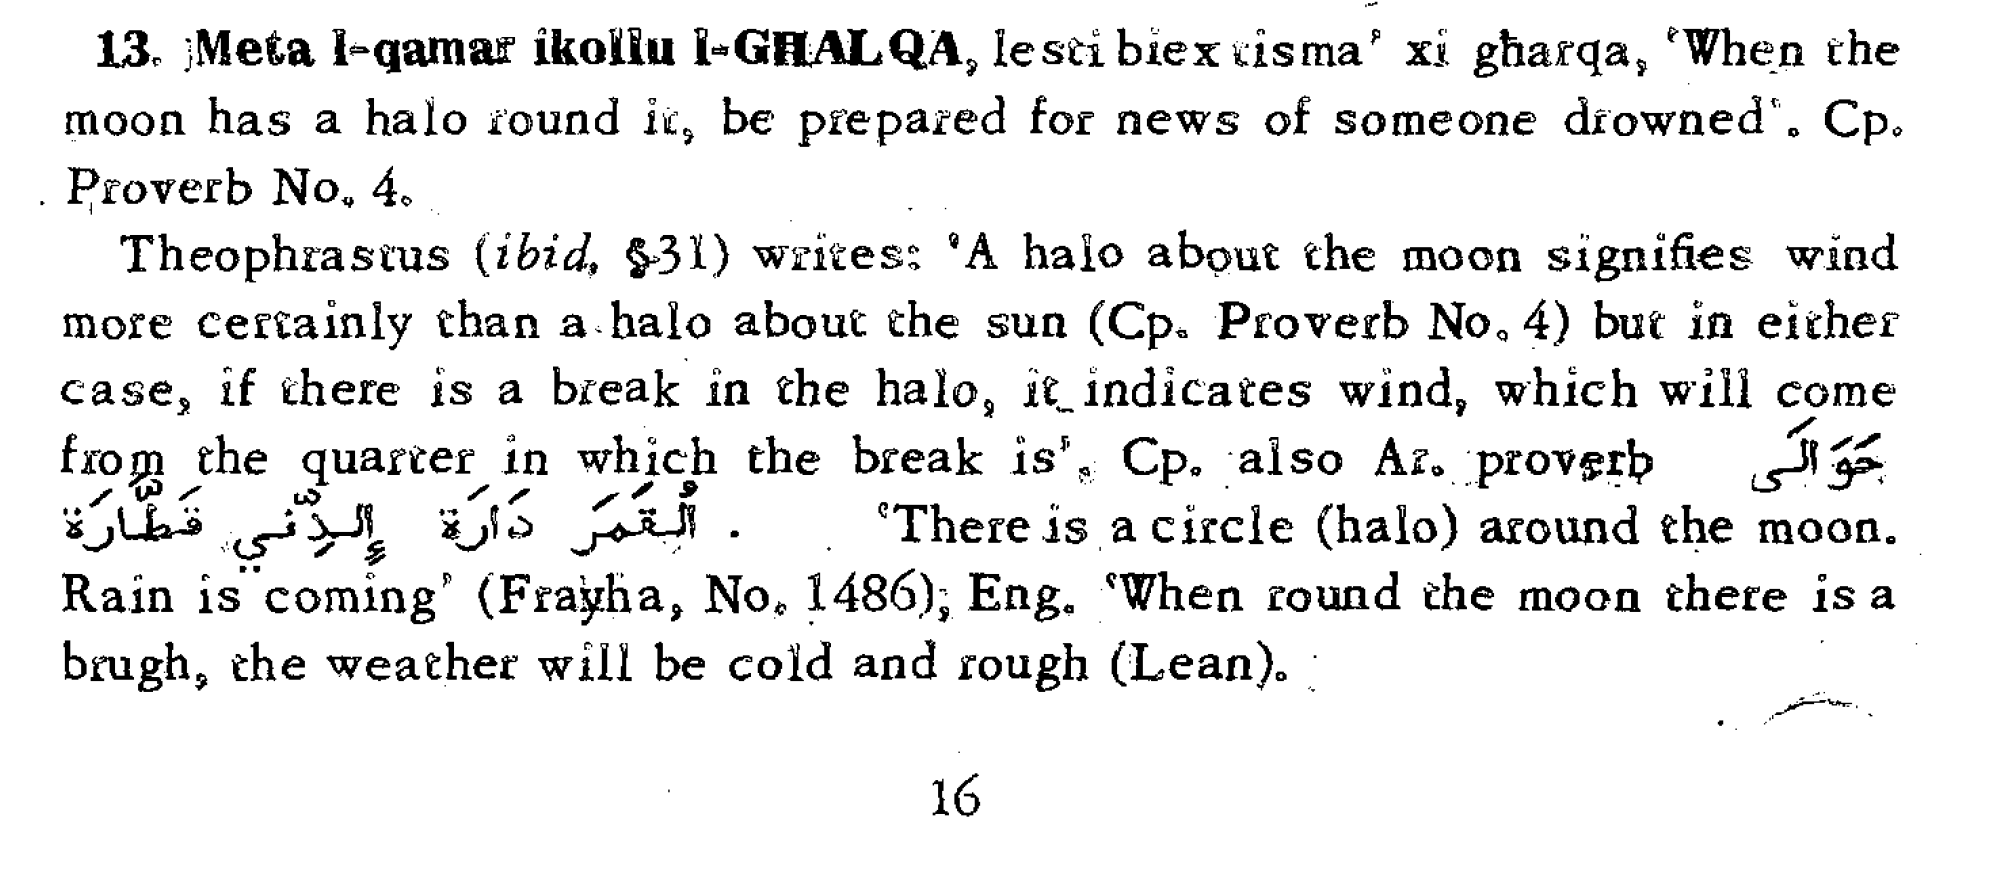 MALTESE METEOROLOGICAL AND AGRICULTUR~L PROVERBS By .J. AQUILINA